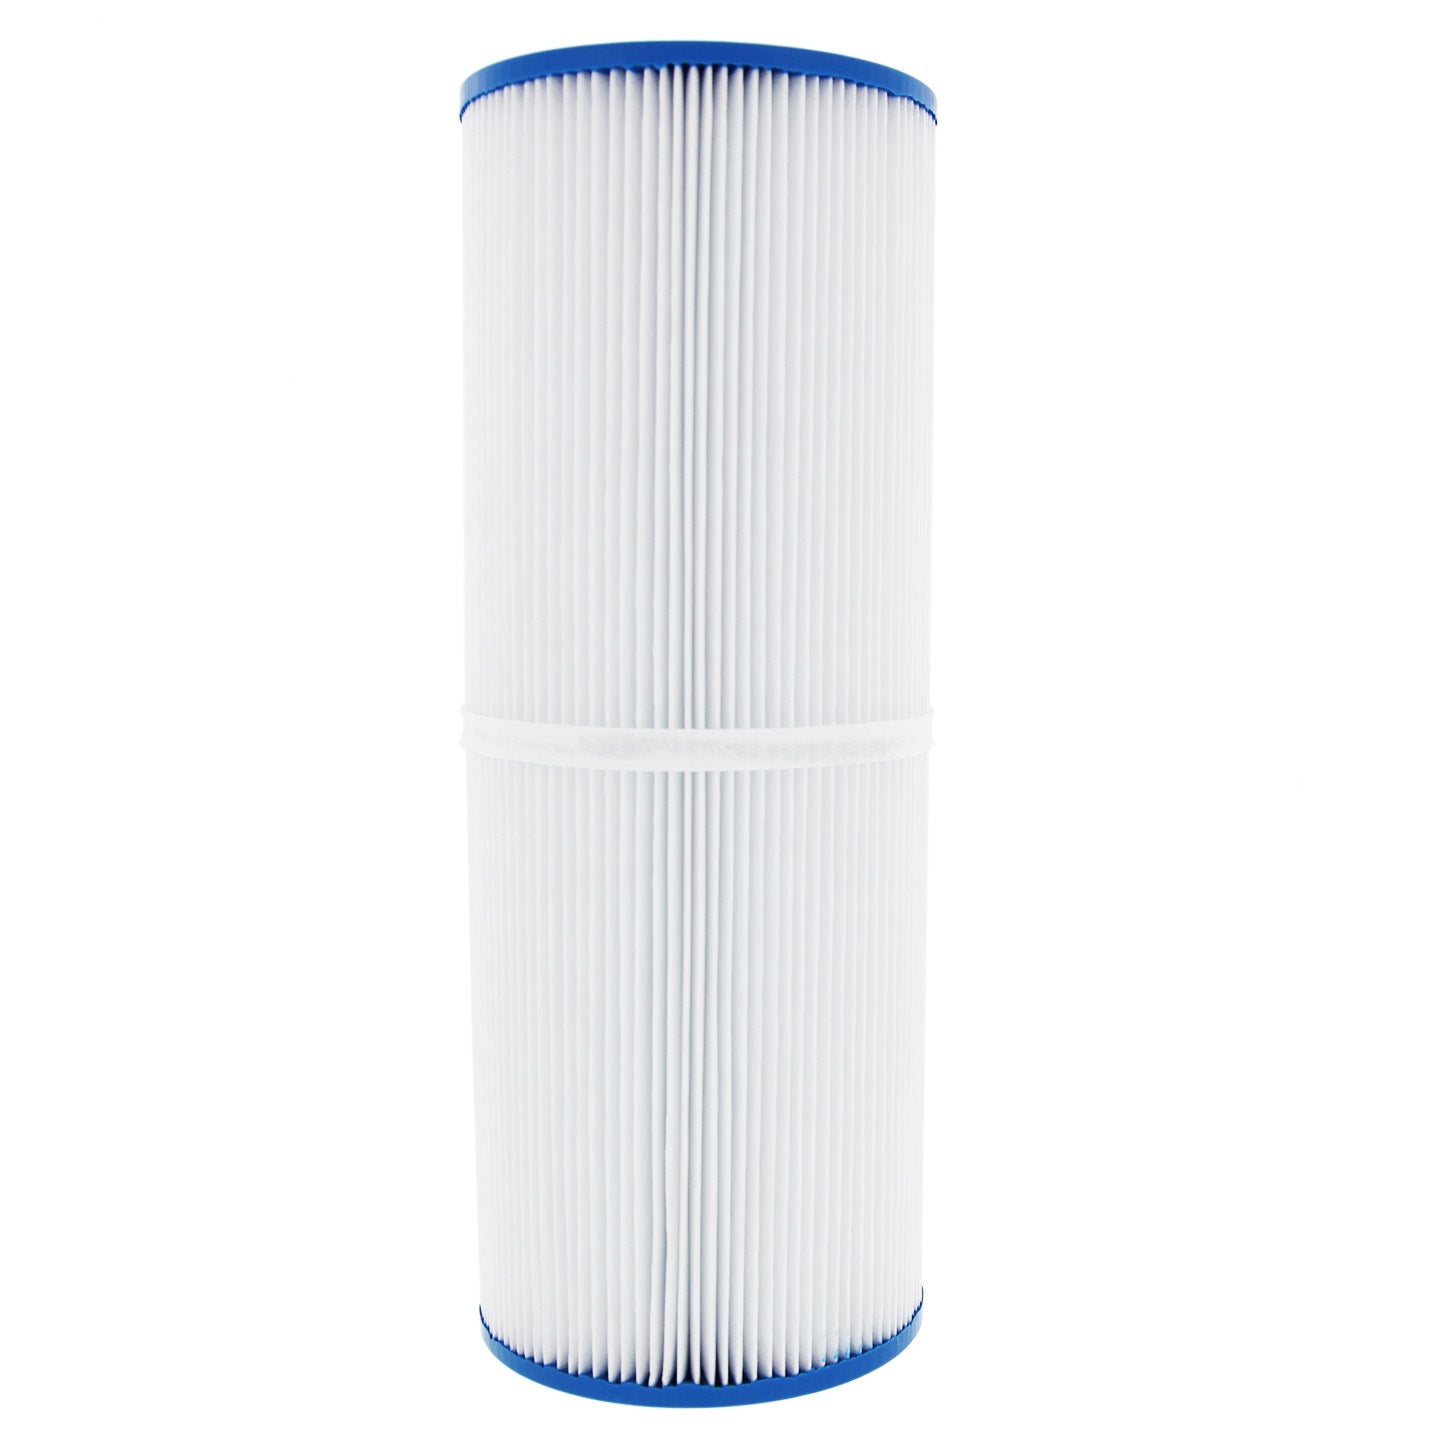 Tier1 Brand Replacement Pool and Spa Filter for 17-2327, 100586, 33521, 25392, 303909, M-4326, 817-2500 & R173429